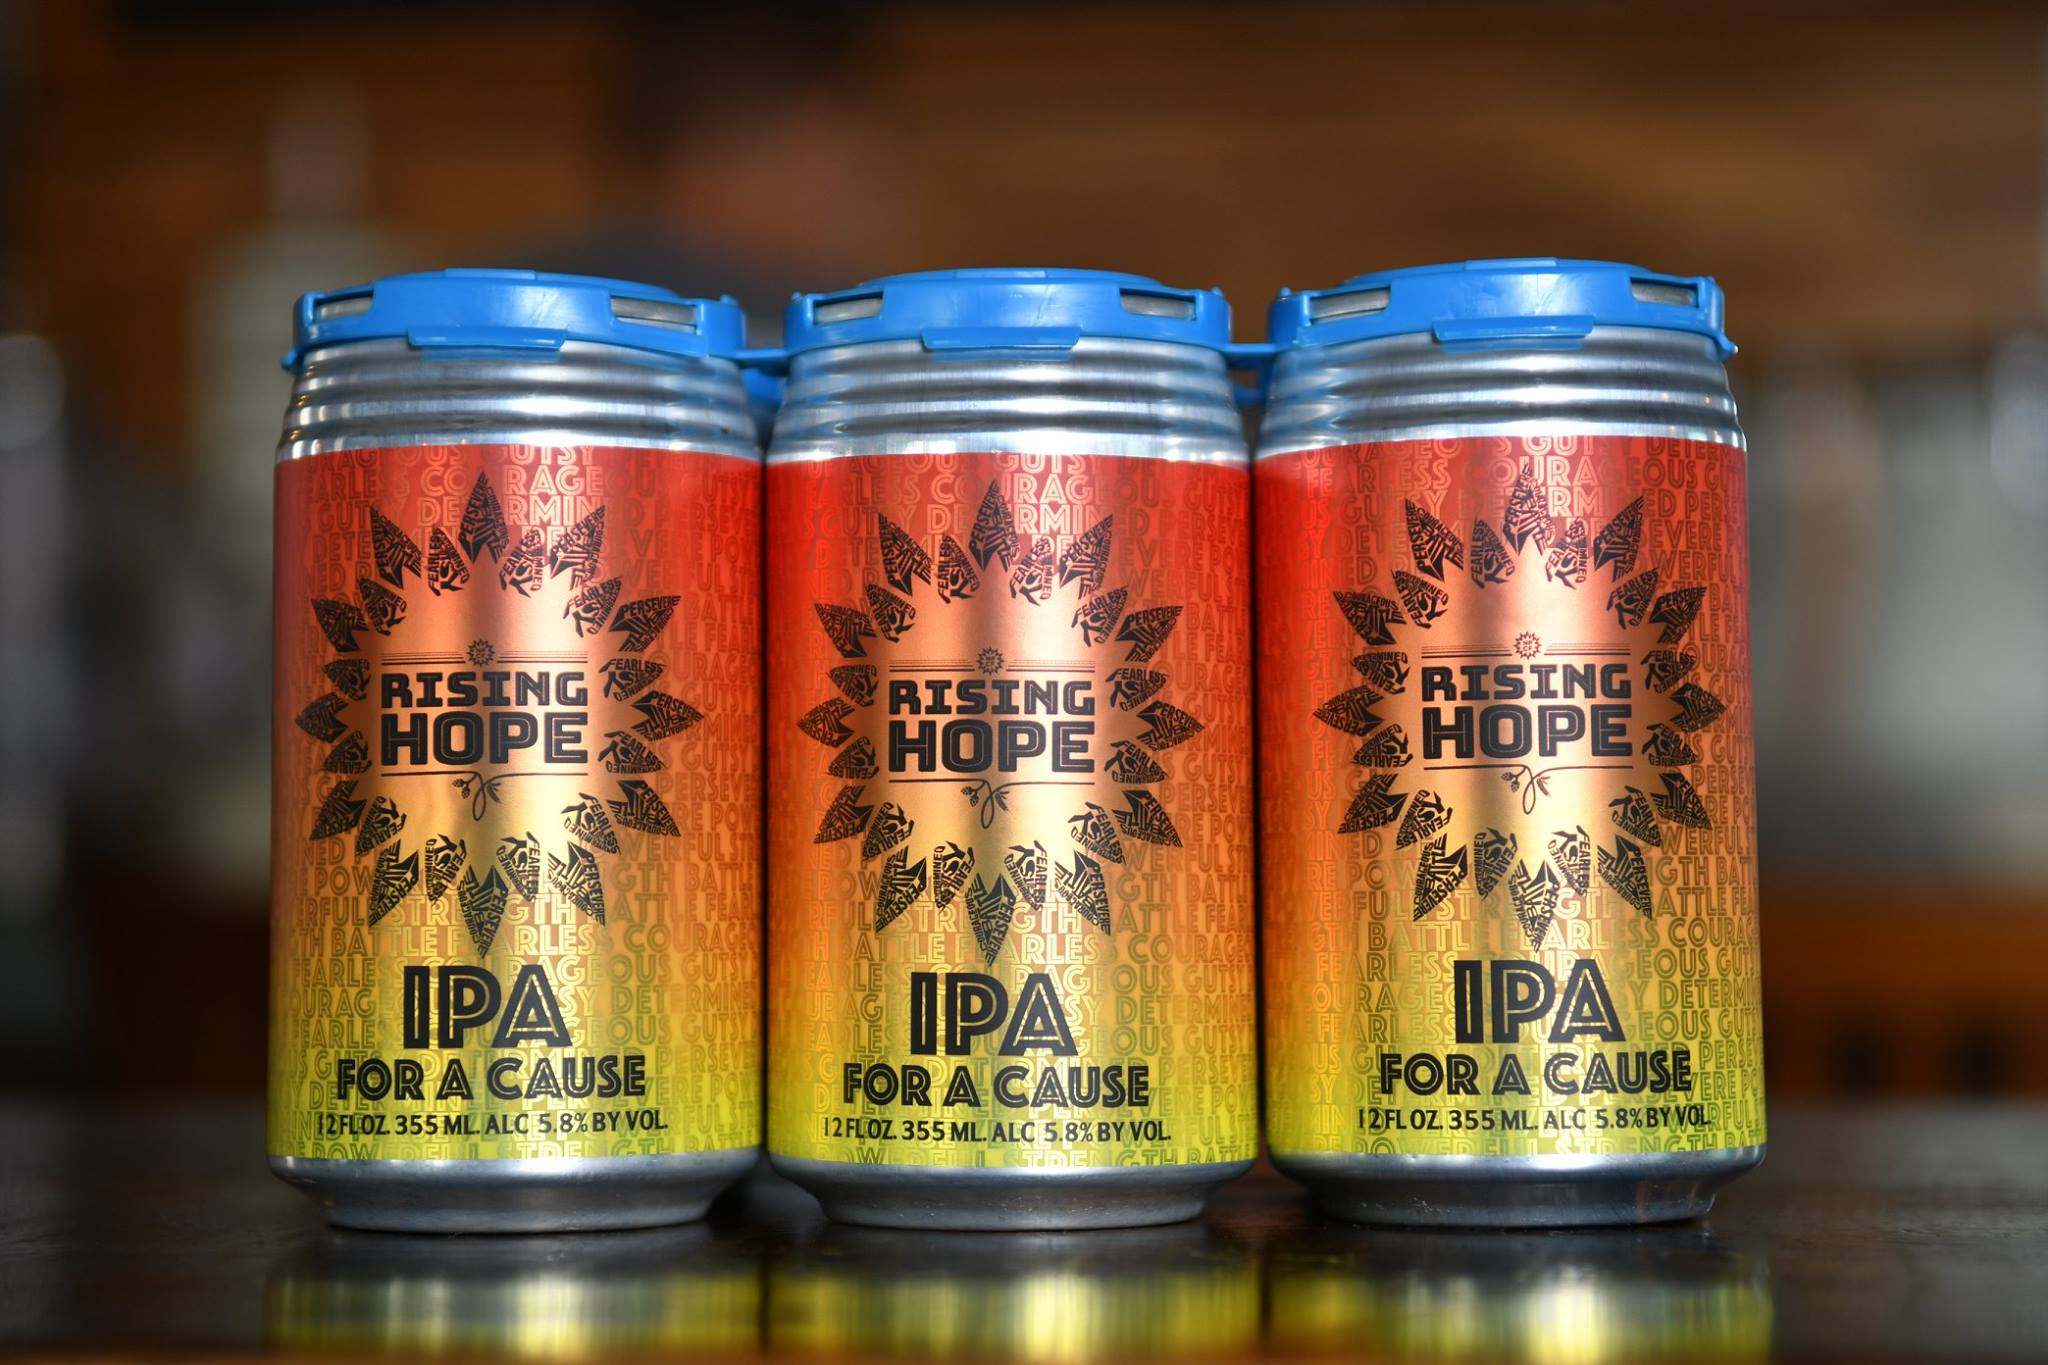 The National Pediatric Cancer Foundation has partnered with breweries across the United States to launch its Brewing Funds the Cure campaign. Proceeds from “Rising Hope” IPA will help fund pediatric c